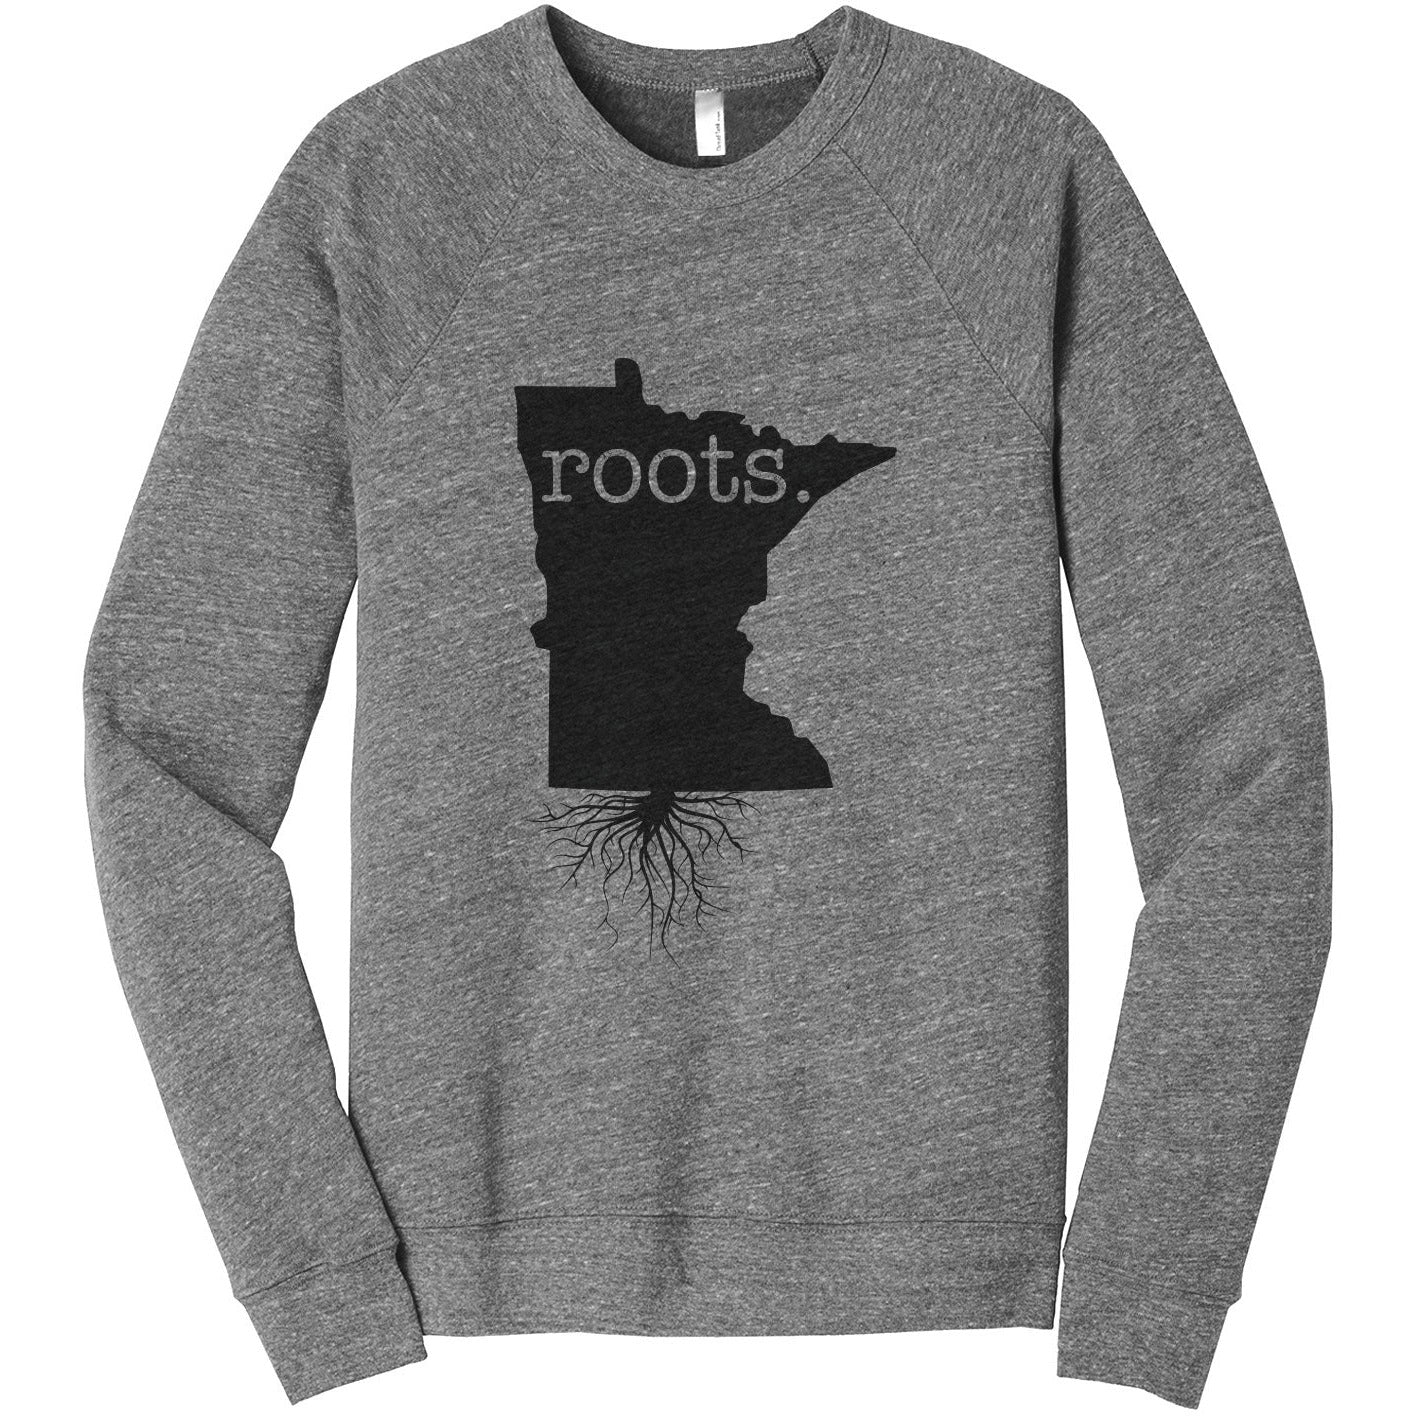 Roots State Minnesota - Stories You Can Wear